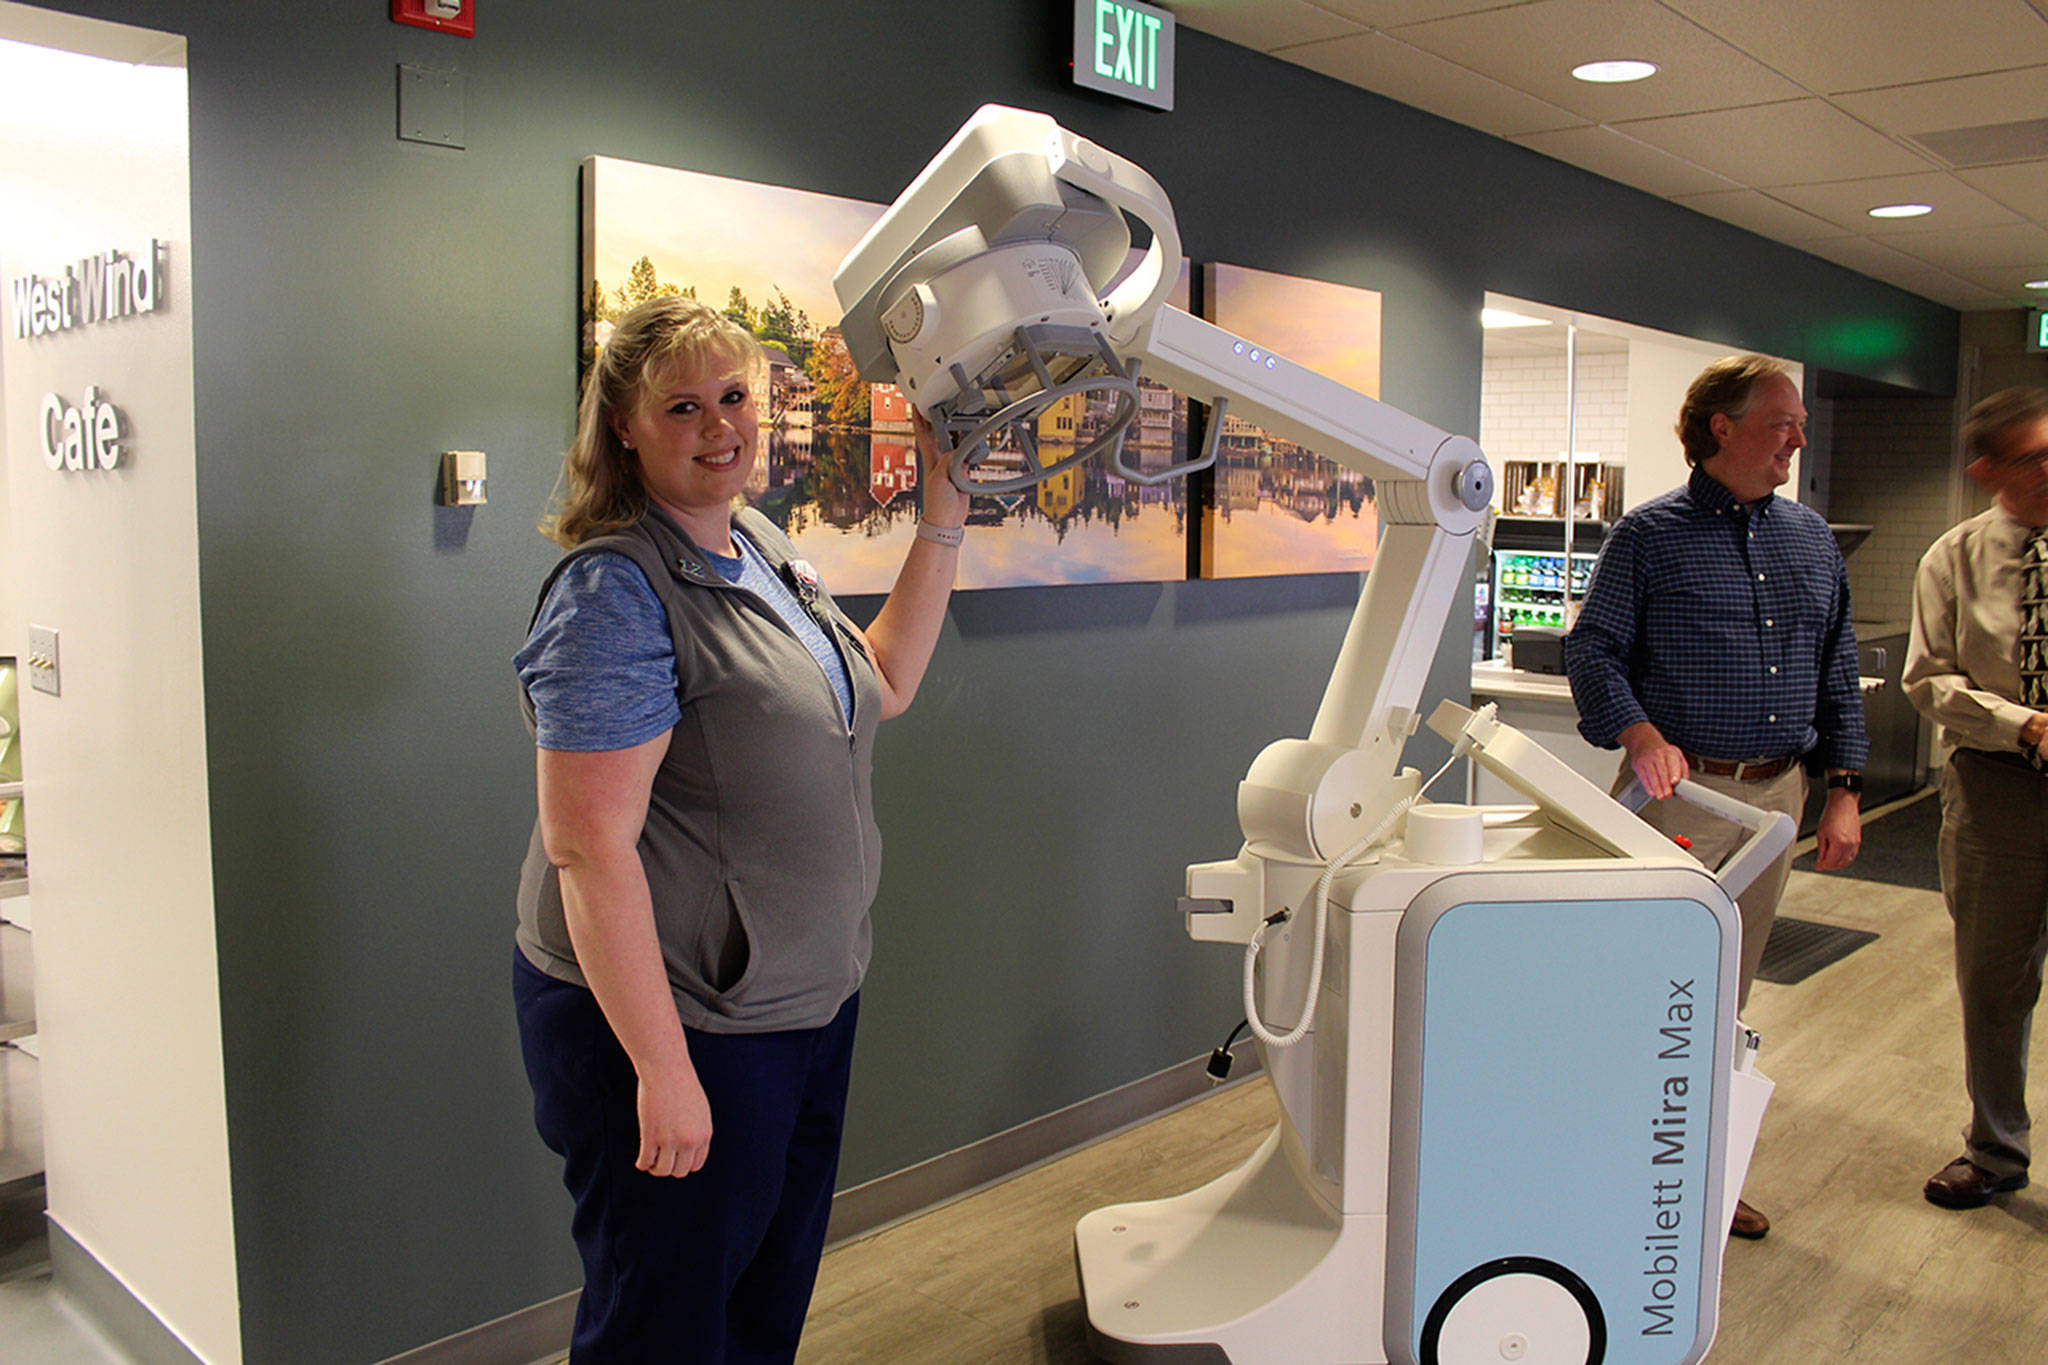 Lead imaging technologist Amanda Garlock shows off a new mobile x-ray machine following a WhidbeyHealth board meeting. The public health system announced Monday its replacing all its diagnostic imaging machines under a new agreement with Siemens Healthineers.                                Photo by Patricia Guthrie/Whidbey News-Times